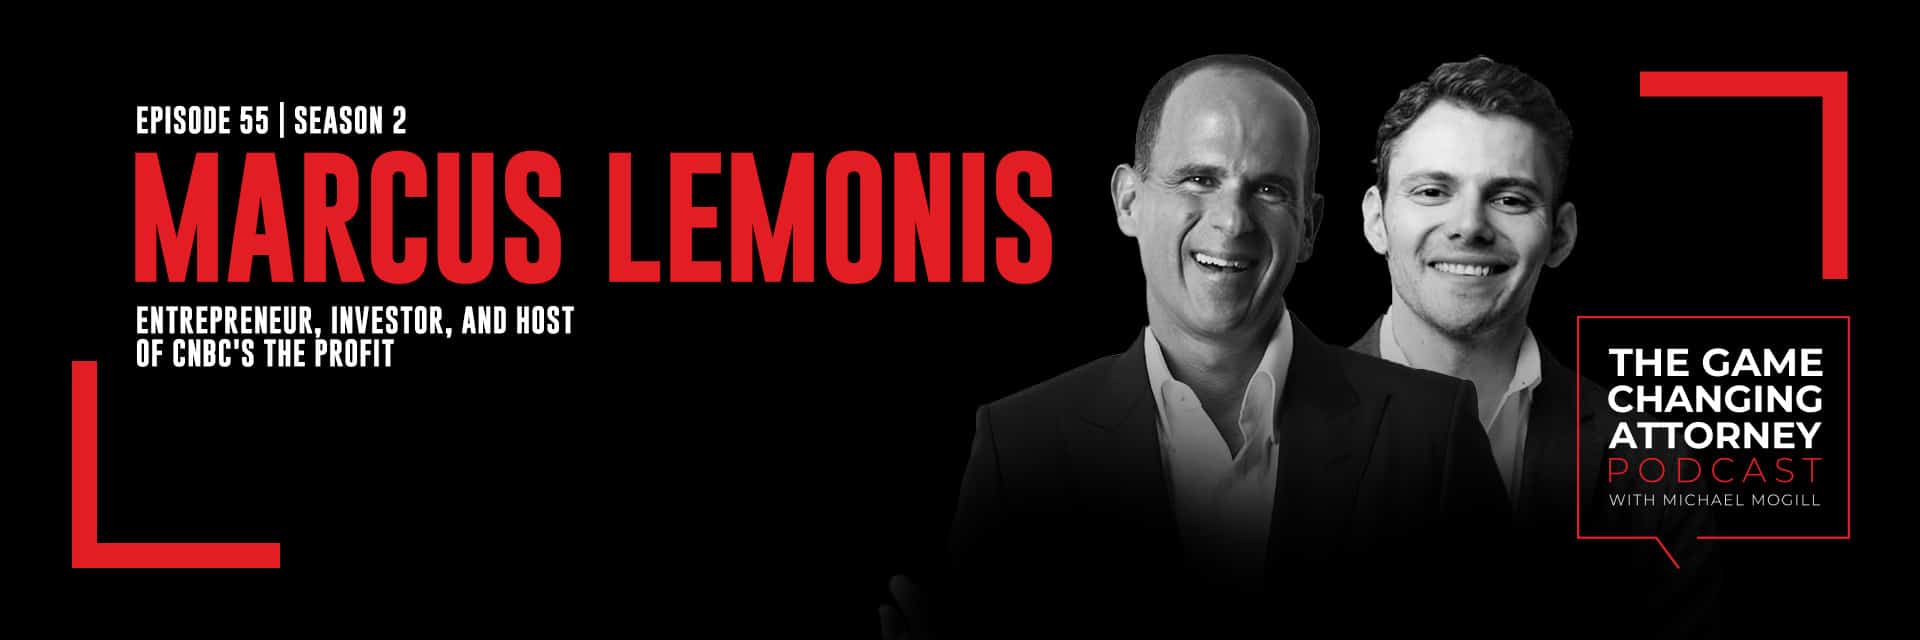 Marcus Lemonis - The Game Changing Attorney Podcast - Desktop